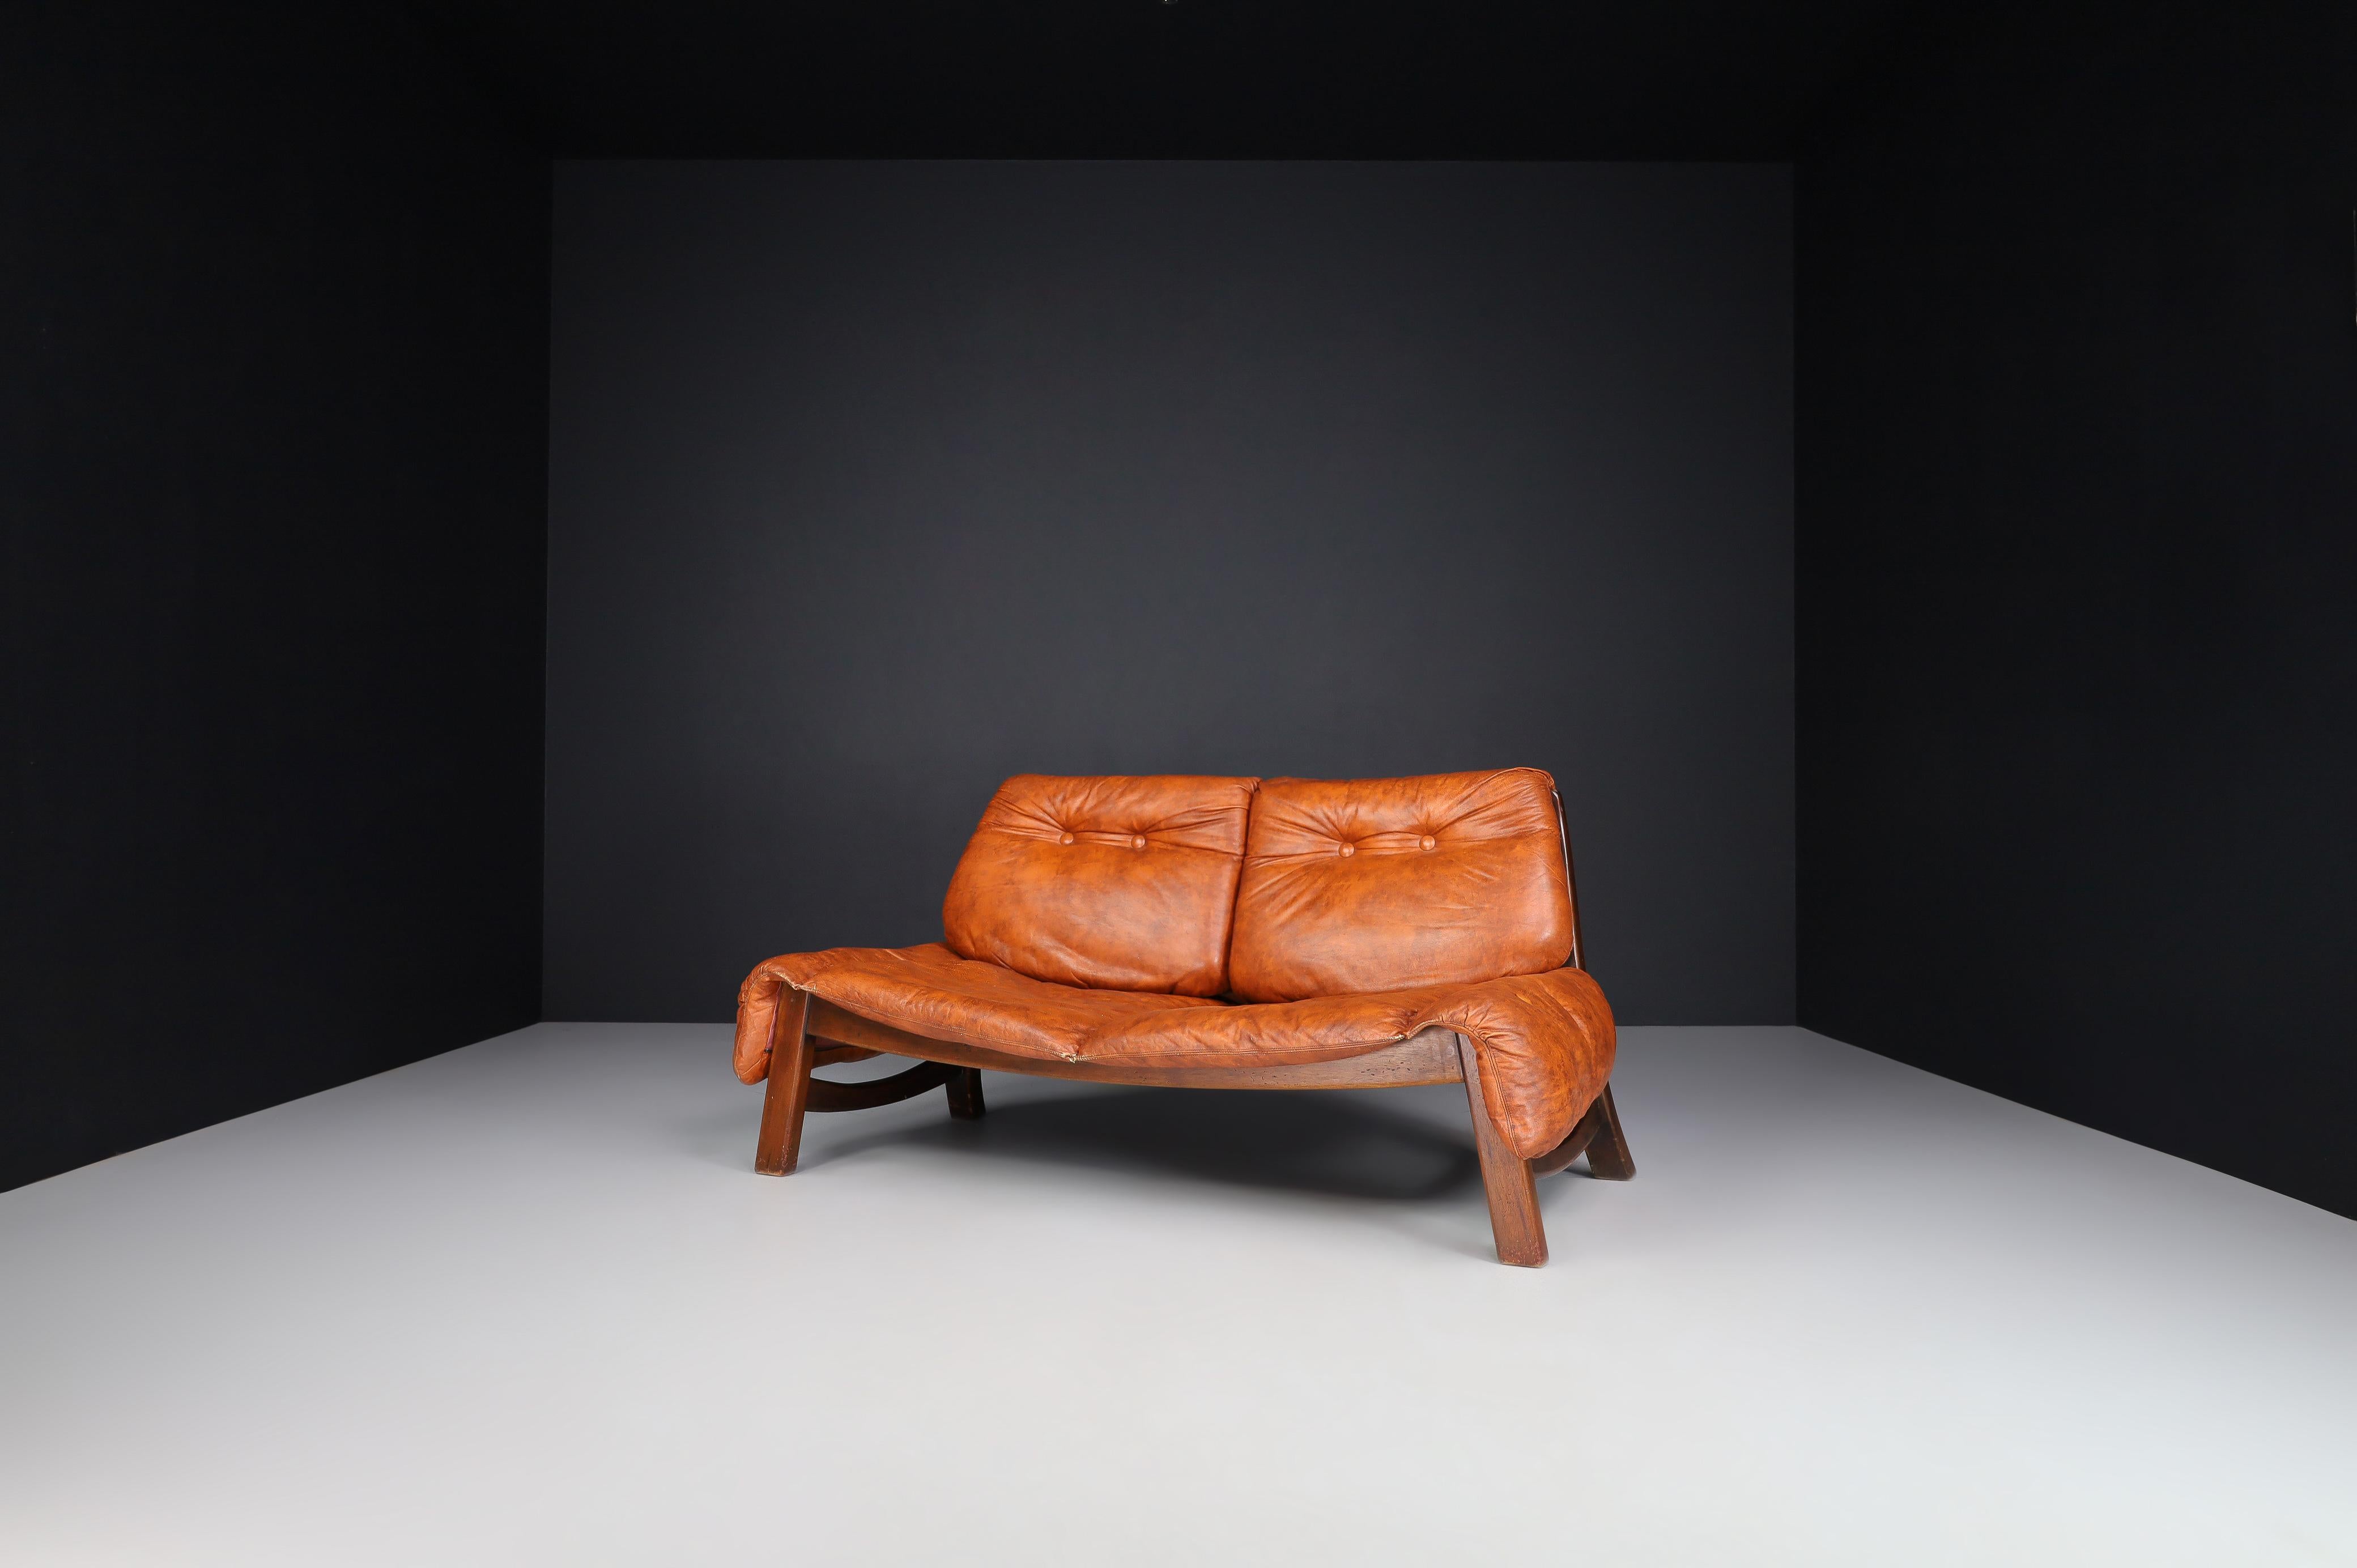 Italian Lounge sofa in fine leather and Walnut Wood, Italy 1970s

This Italian oversized lounge sofa from the 1970s is made of solid walnut wood and fine leather. This sofa has an elegant design that combines both elements and is comfortable with